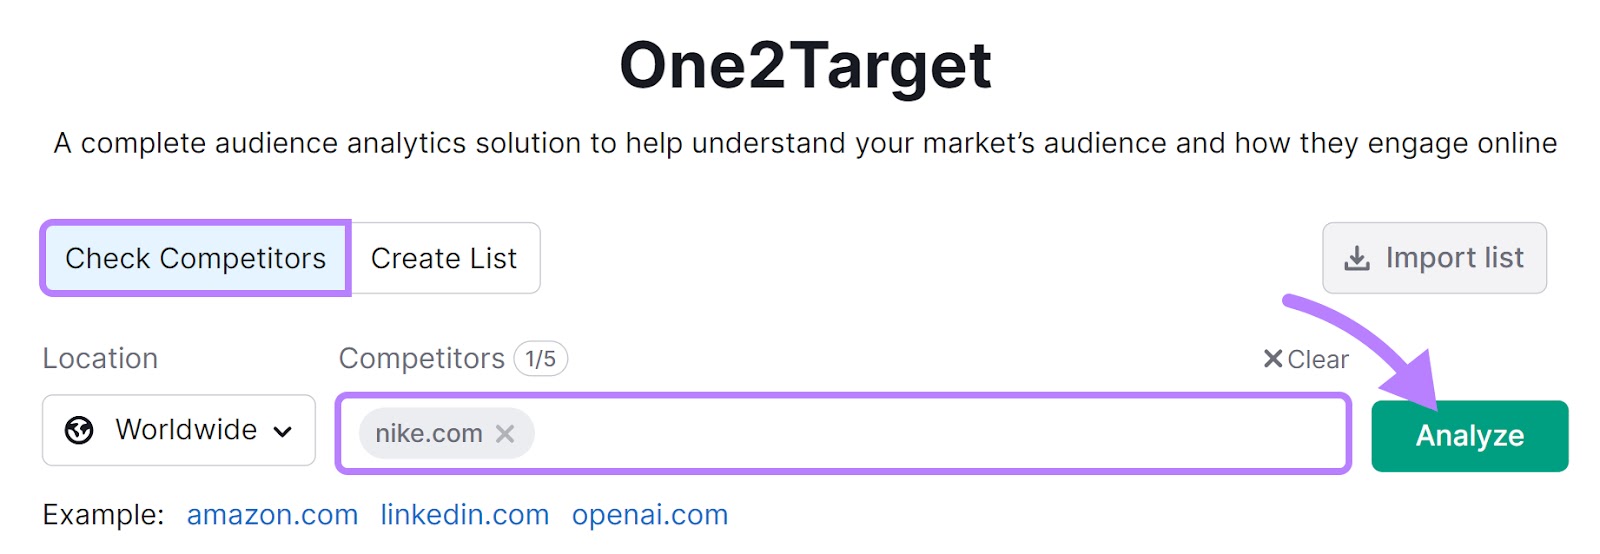 "nike.com" entered into the One2Target tool search bar